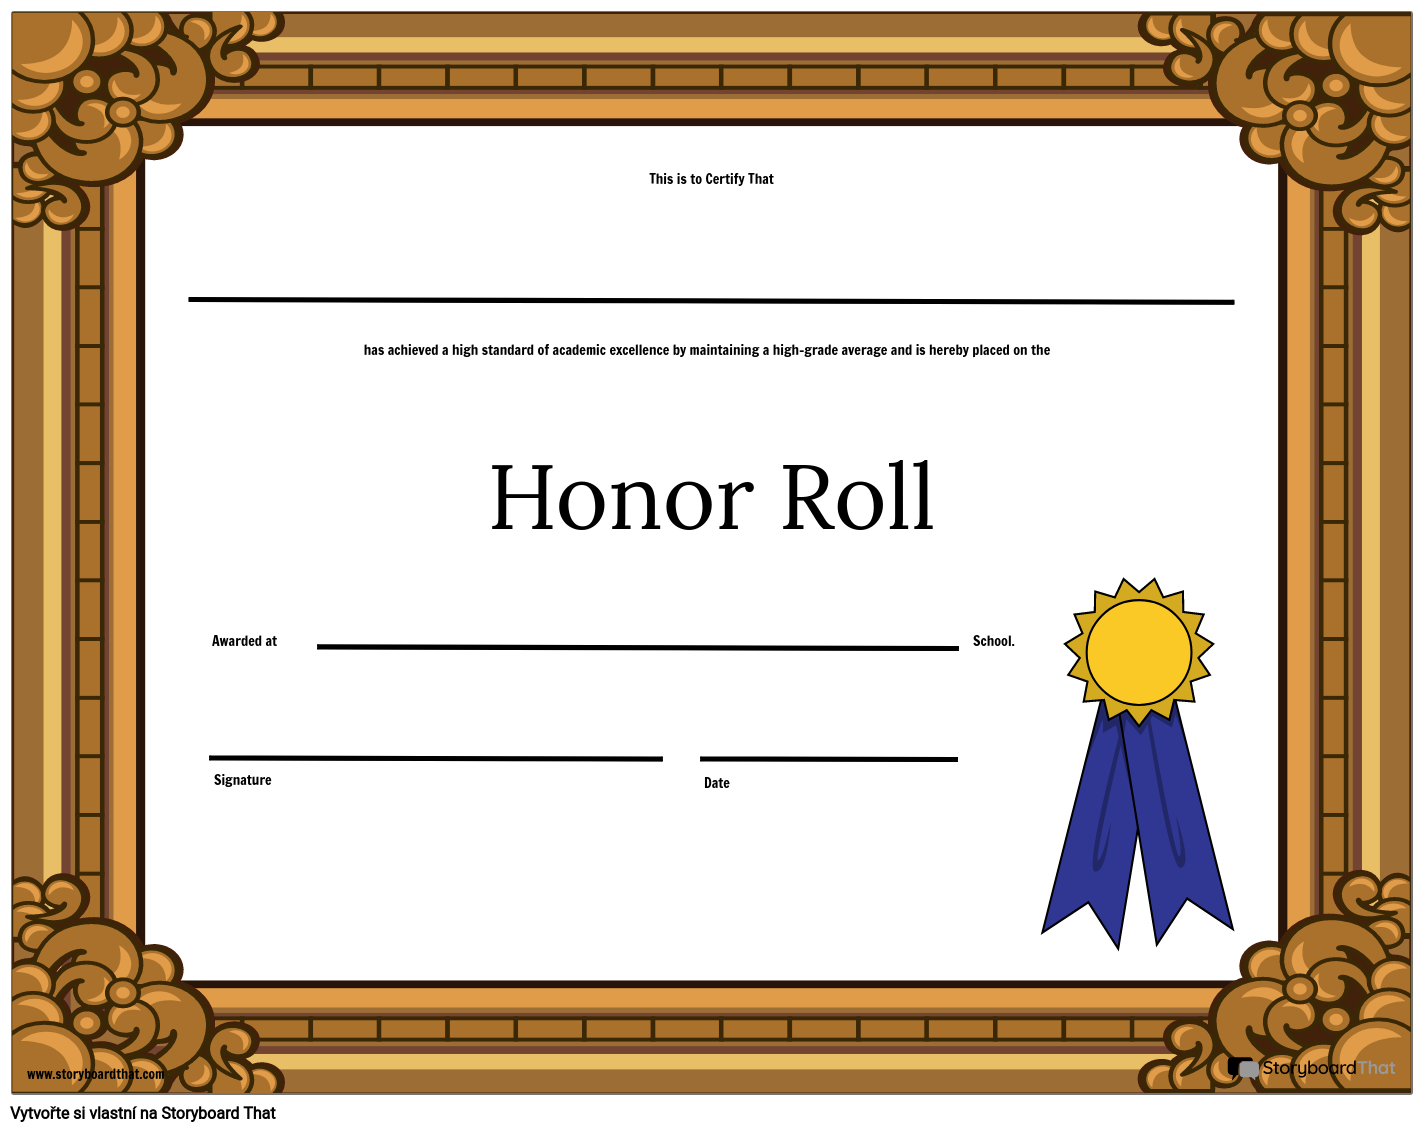 Honor Roll Requirements College